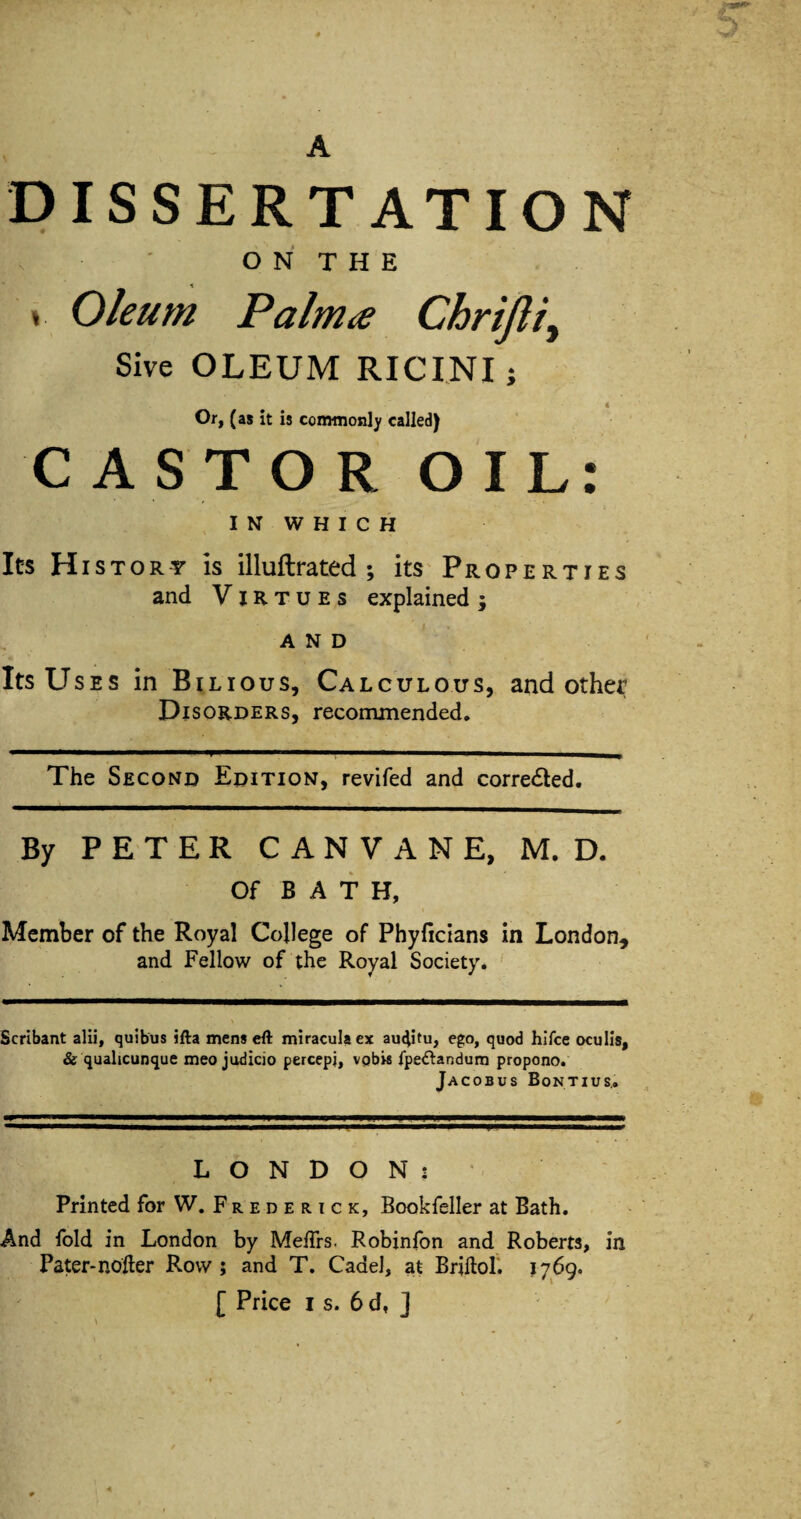 DISSERTATION o N T H E » Oleum Palm^ Chrijli^ Sive OLEUM RICINI j « Or, (as it is commonly called) CAST OR OIL: I N W H I C H It'S History is illuftrated ; itS'Properties and Virtues explained; AND Its Uses in Bilious, Calculous, and other Disorders, recommended. The Second Edition, revifed and corrected. By PETER CANVANE, M. D. Of BAT H, Member of the Royal College of Phyficians in London, and Fellow of the Royal Society. ' Scribant alii, quibus ifta mens eft miraculacx aui^tu, ego, quod hlfce oculls, & qualicunque meo judicio percepi, vpbM fpedlandura propono. Jacobus Bontius,, LONDON: Printed for W. F r e d e r i c k, Bookfeller at Bath. And fold in London by MeiTrs. Robinfon and Roberta, in Pater-nofter Row; and T. Cade], at BriftoL 1769.